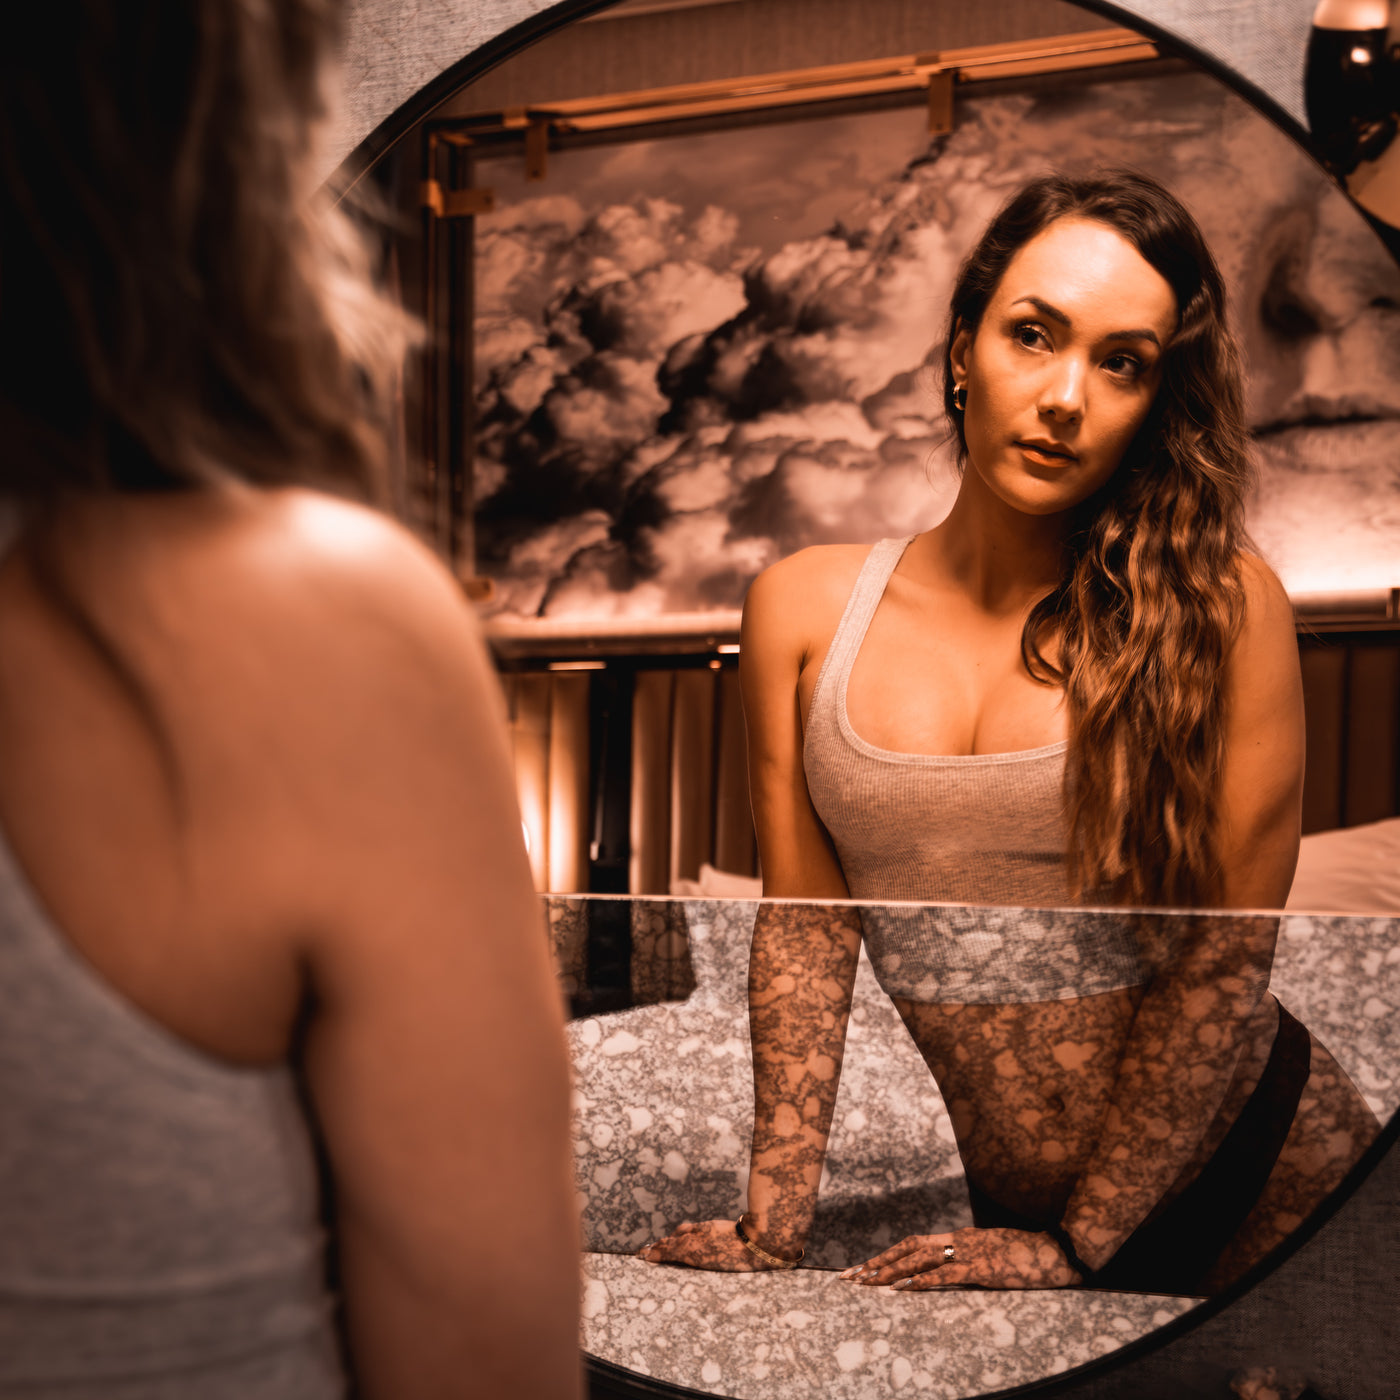 Woman looking at her reflection in mirror